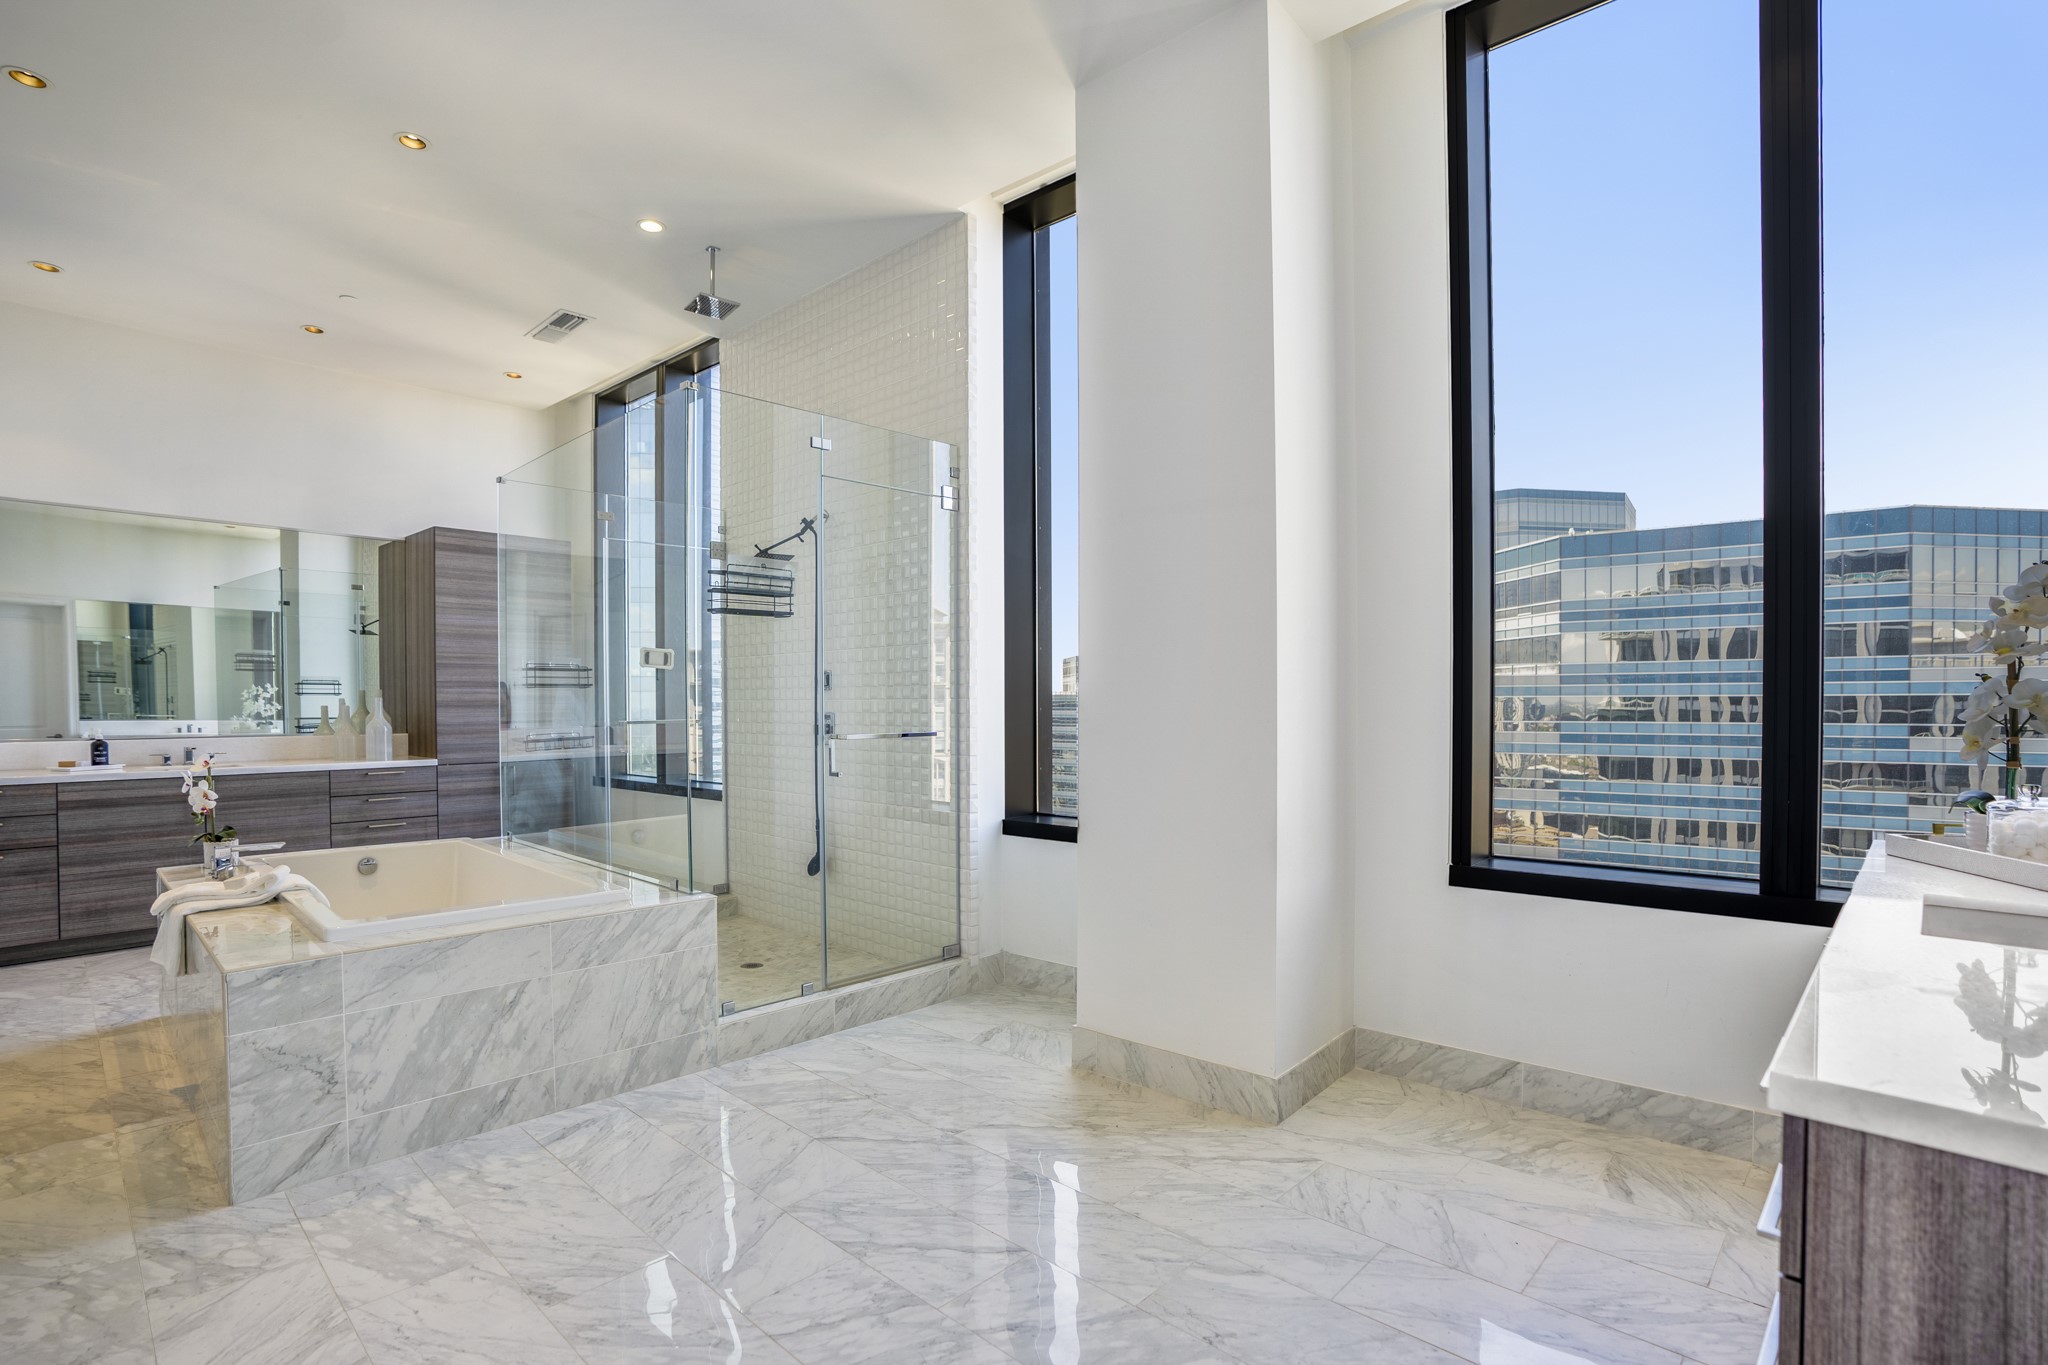 The spacious primary bathroom
has large windows with plenty
of natural lighting!